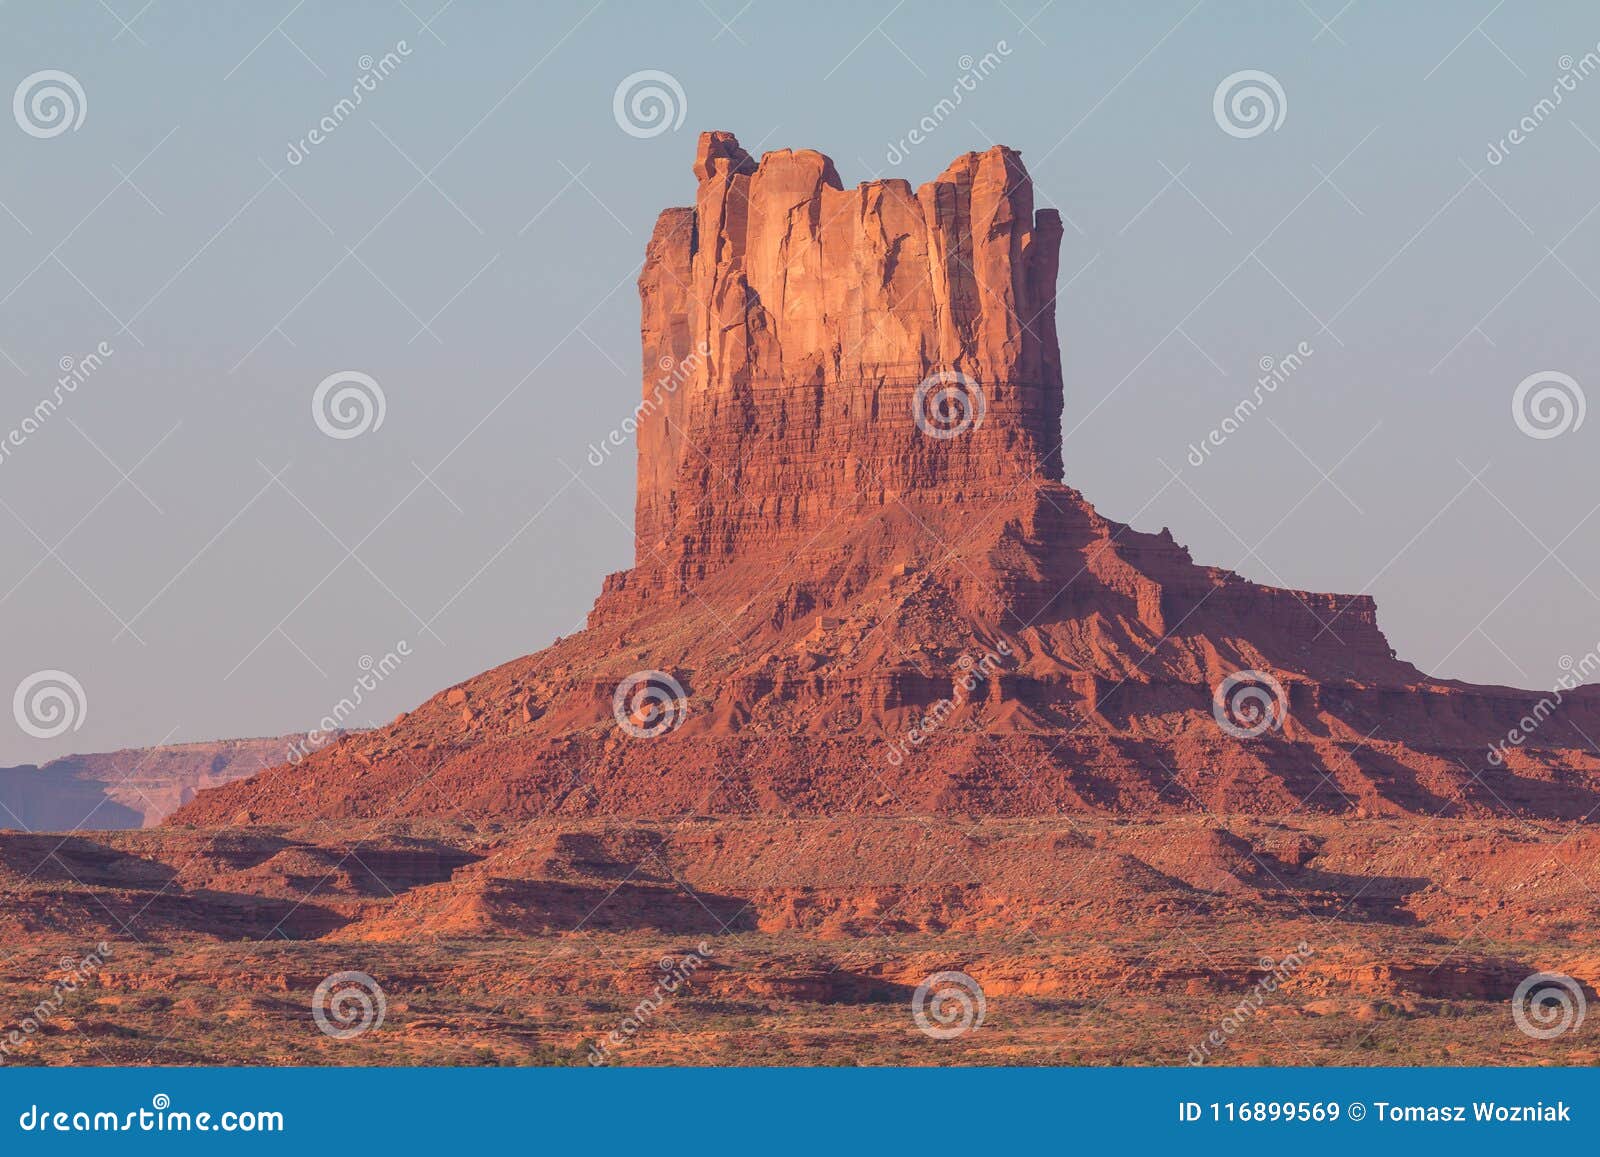 View on Red Rock Formation in Tribal Park. Stock Image - Image formation, panorama: 116899569